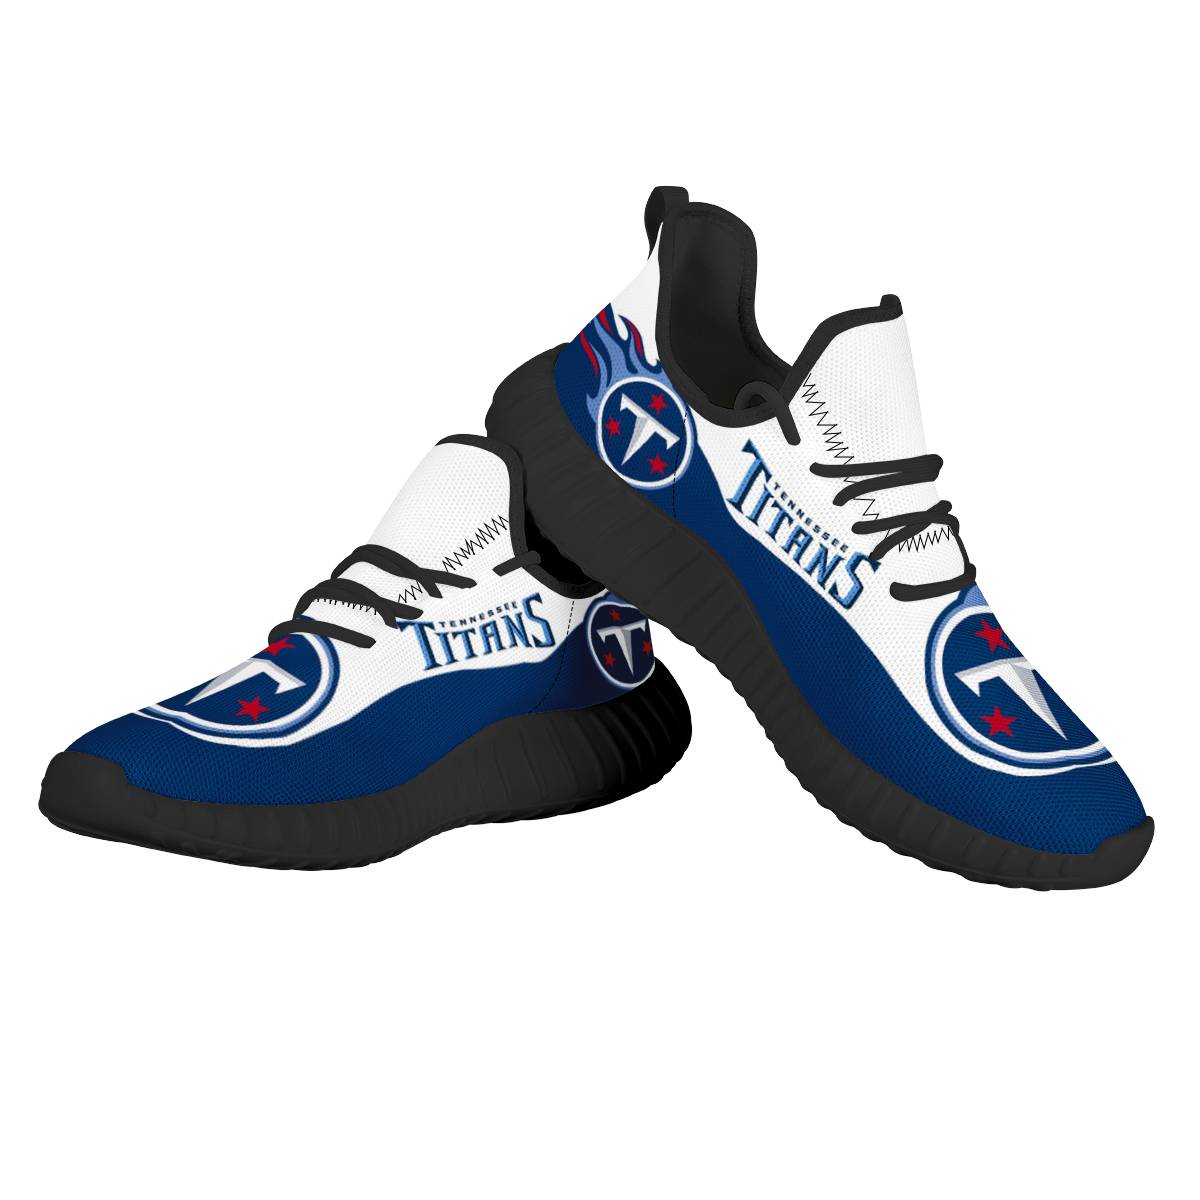 Men's NFL Tennessee Titans Mesh Knit Sneakers/Shoes 002